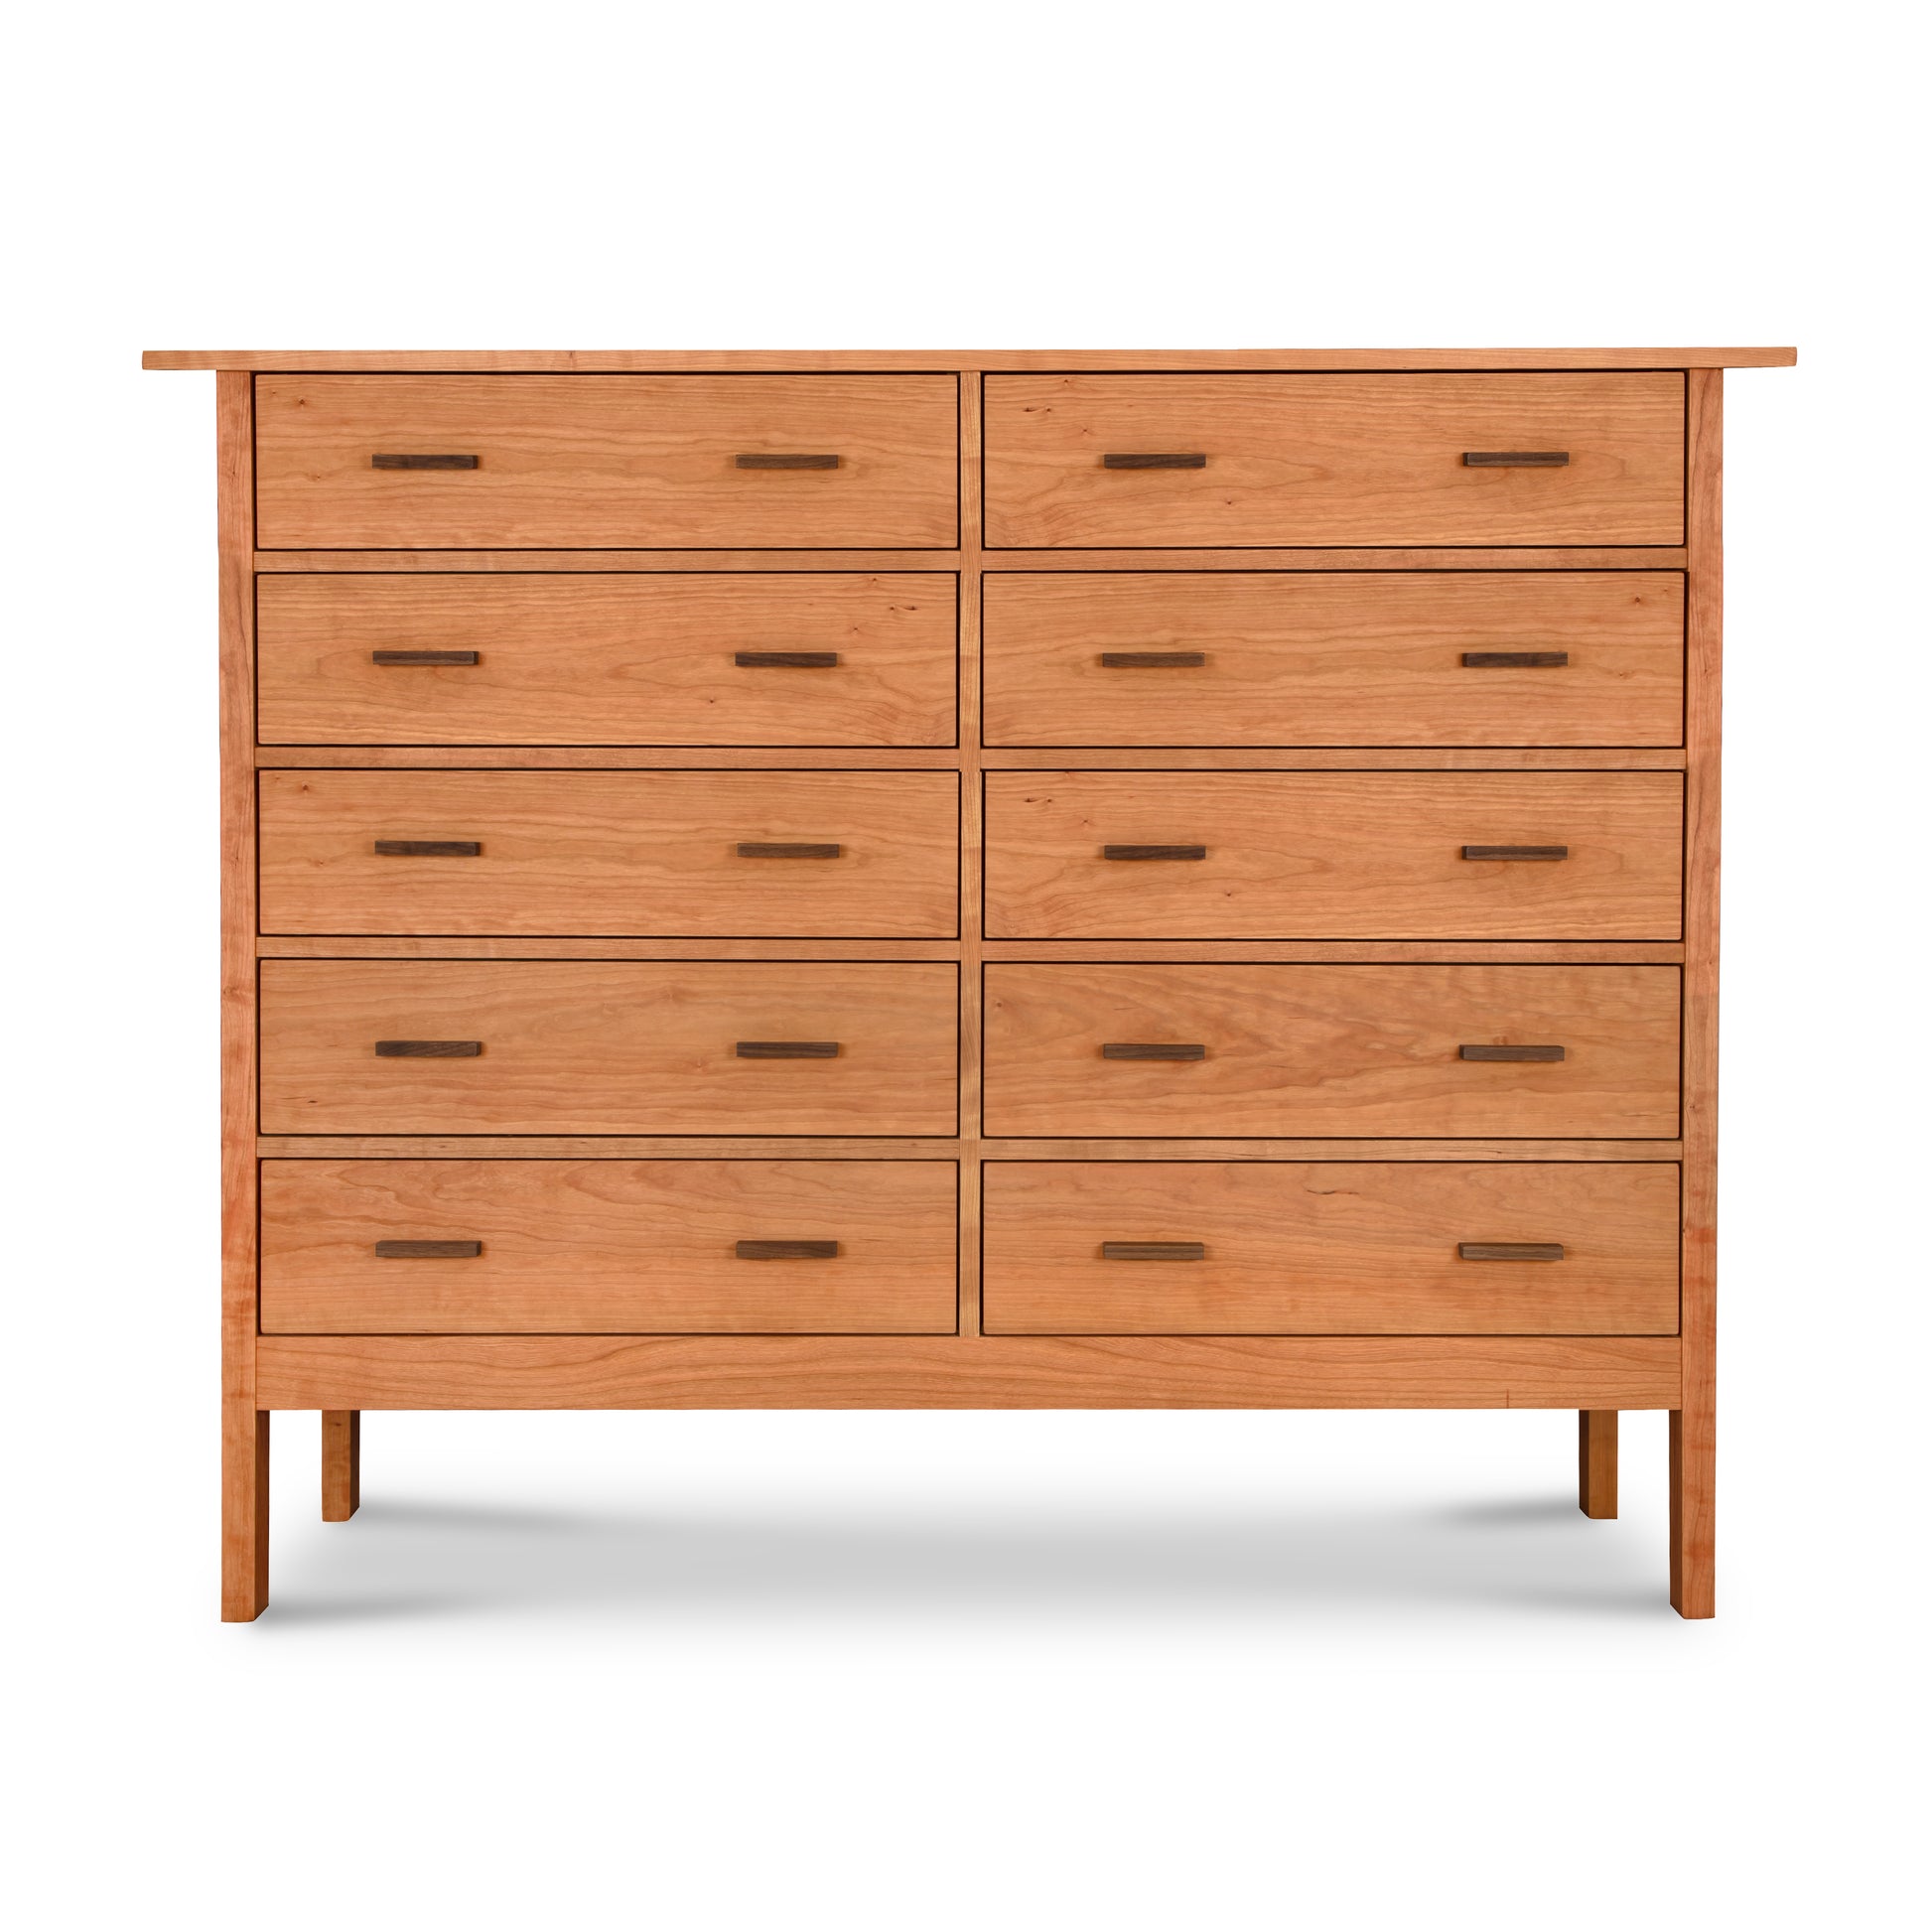 A Vermont Furniture Designs Modern Craftsman 10-Drawer Dresser, eco-friendly furniture for bedroom storage, isolated on a white background.